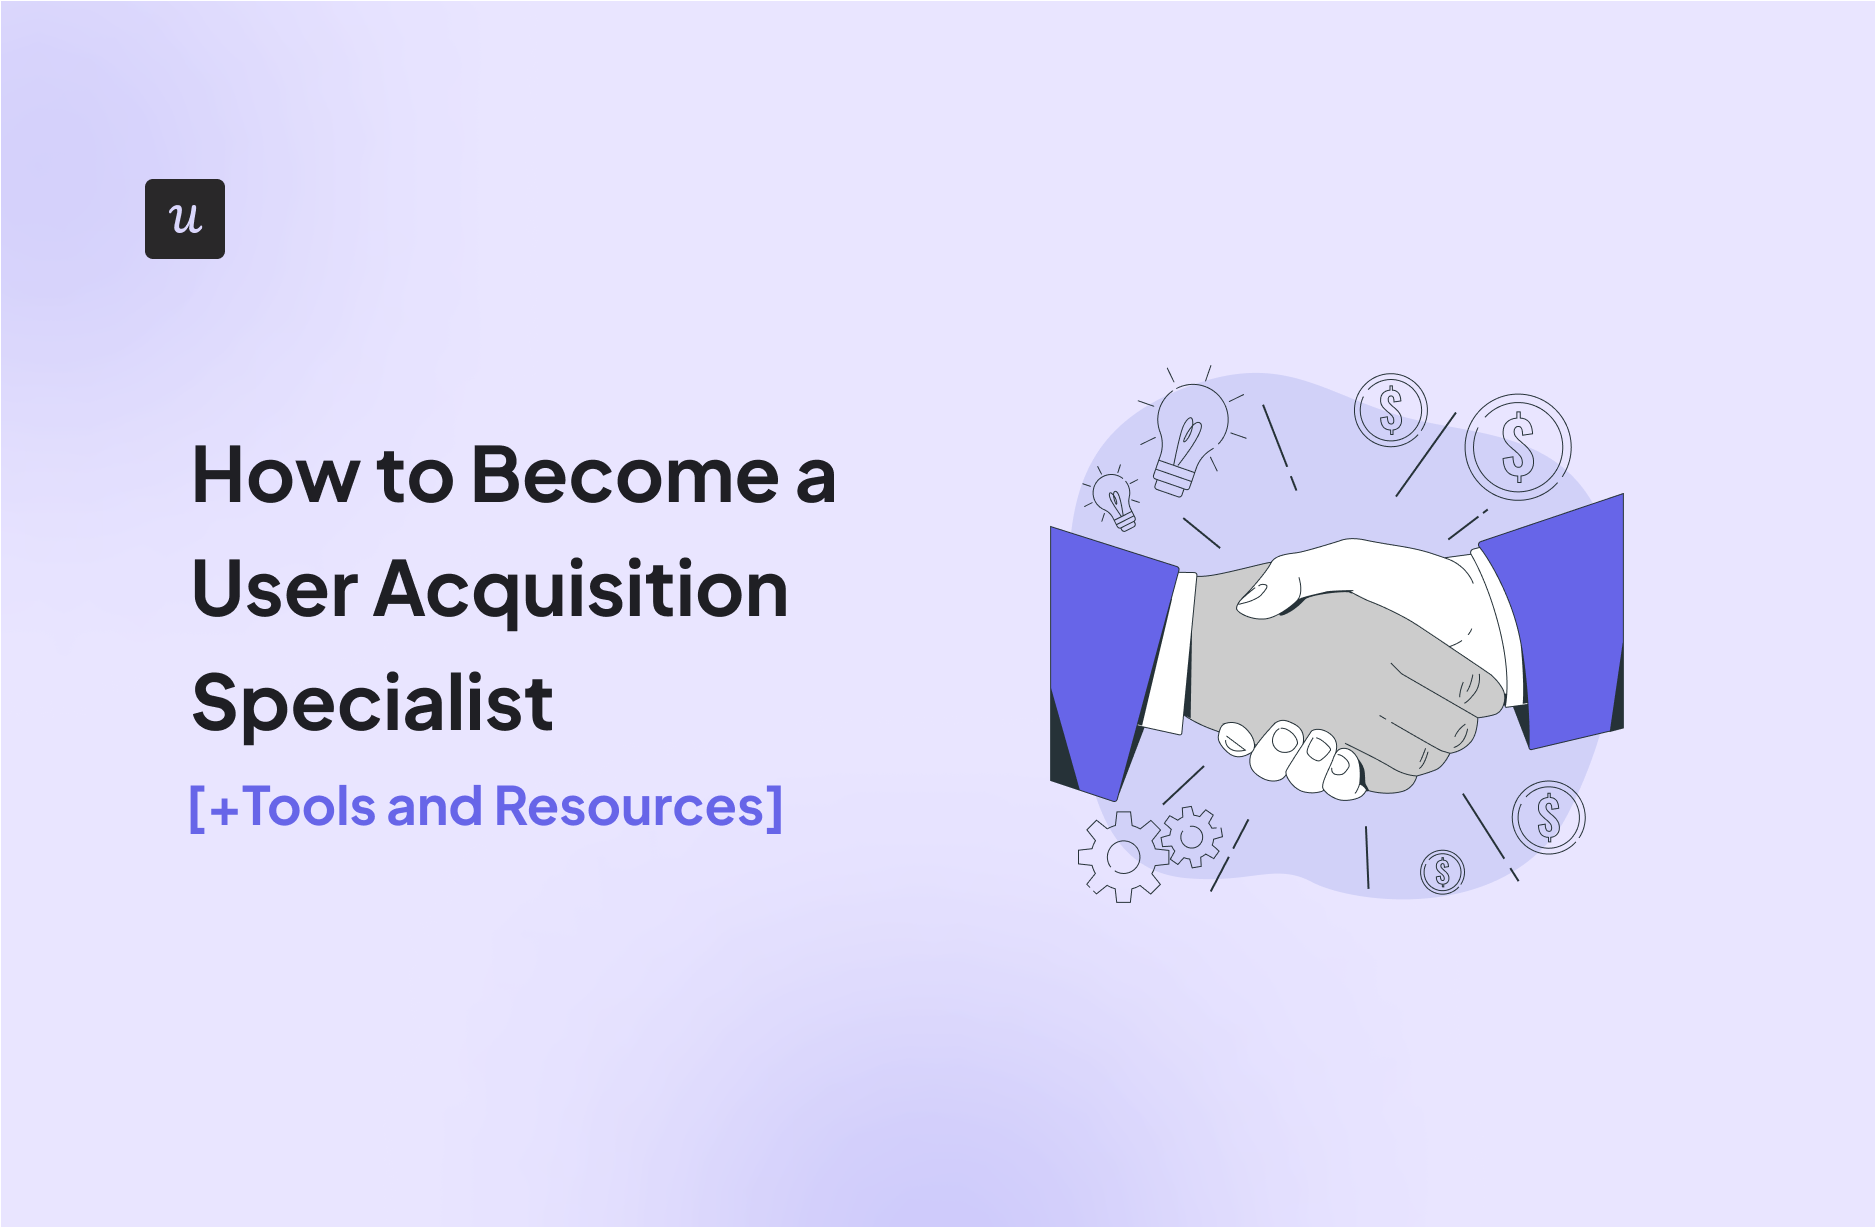 How to Become a User Acquisition Specialist [+Tools and Resources]